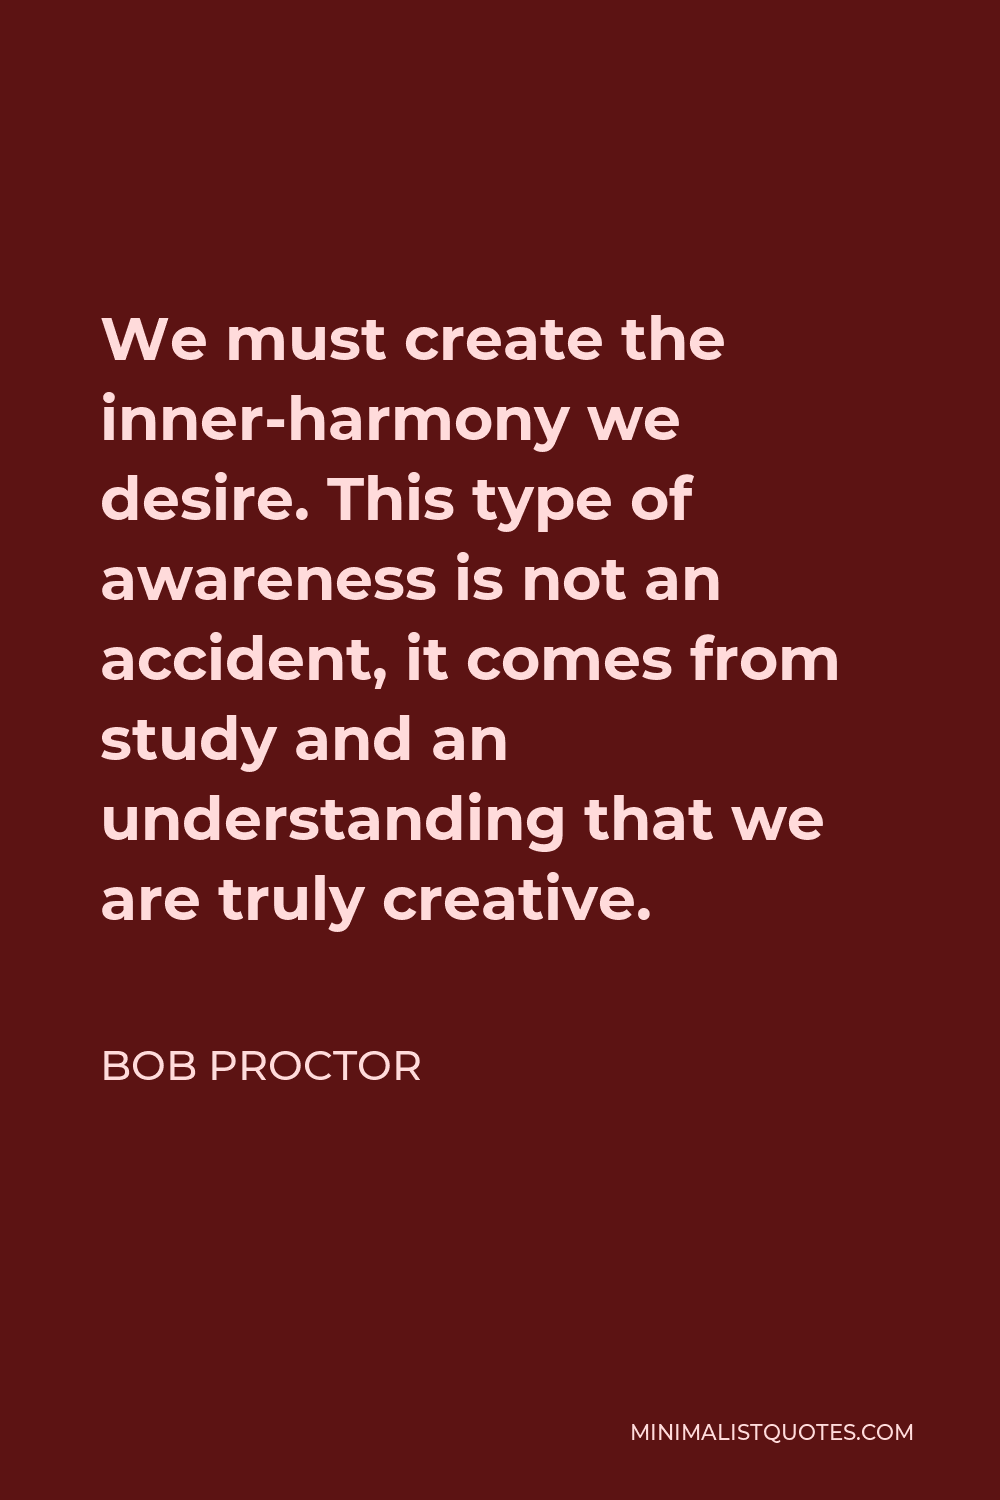 Bob Proctor Quote - We must create the inner-harmony we desire. This type of awareness is not an accident, it comes from study and an understanding that we are truly creative.